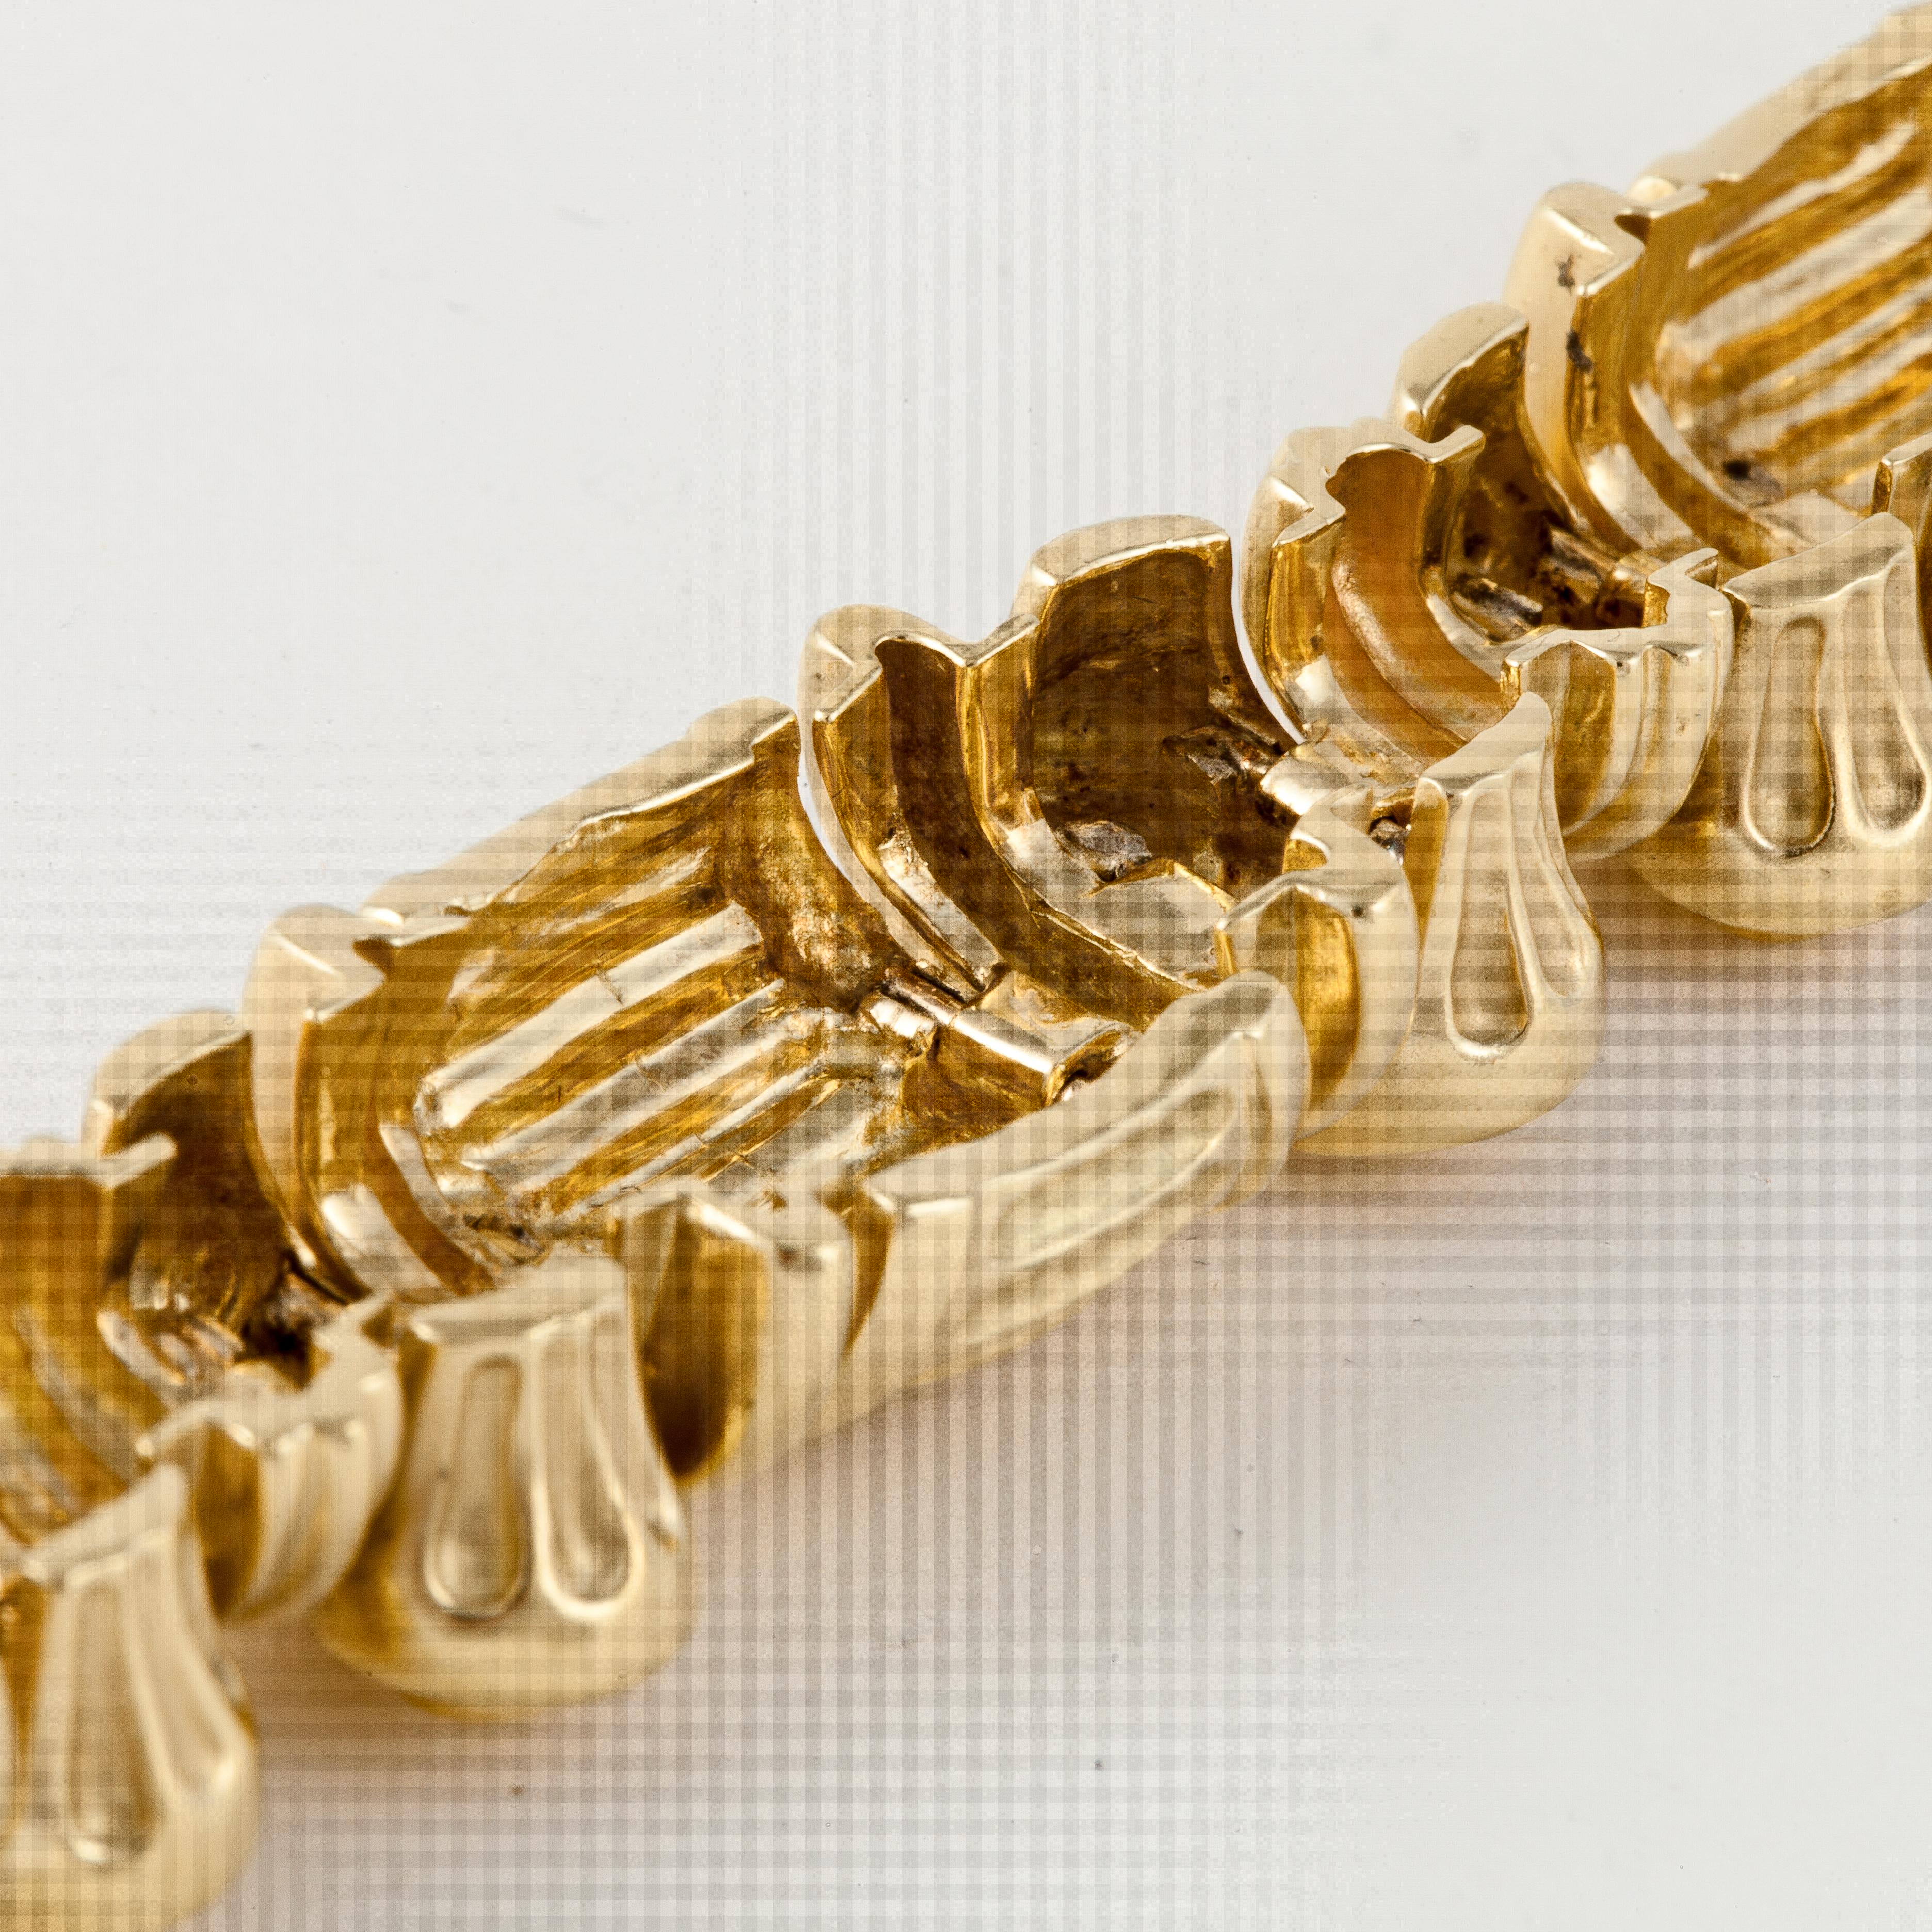 Esti Frederica 18K yellow gold bracelet.  Links are Roman/Greek inspired and resemble columns with scrolling in between.  Measures 8 1/8 inches long and 11/16 inches wide.  Tongue closure with underneath safety.  Matching necklace and earrings in